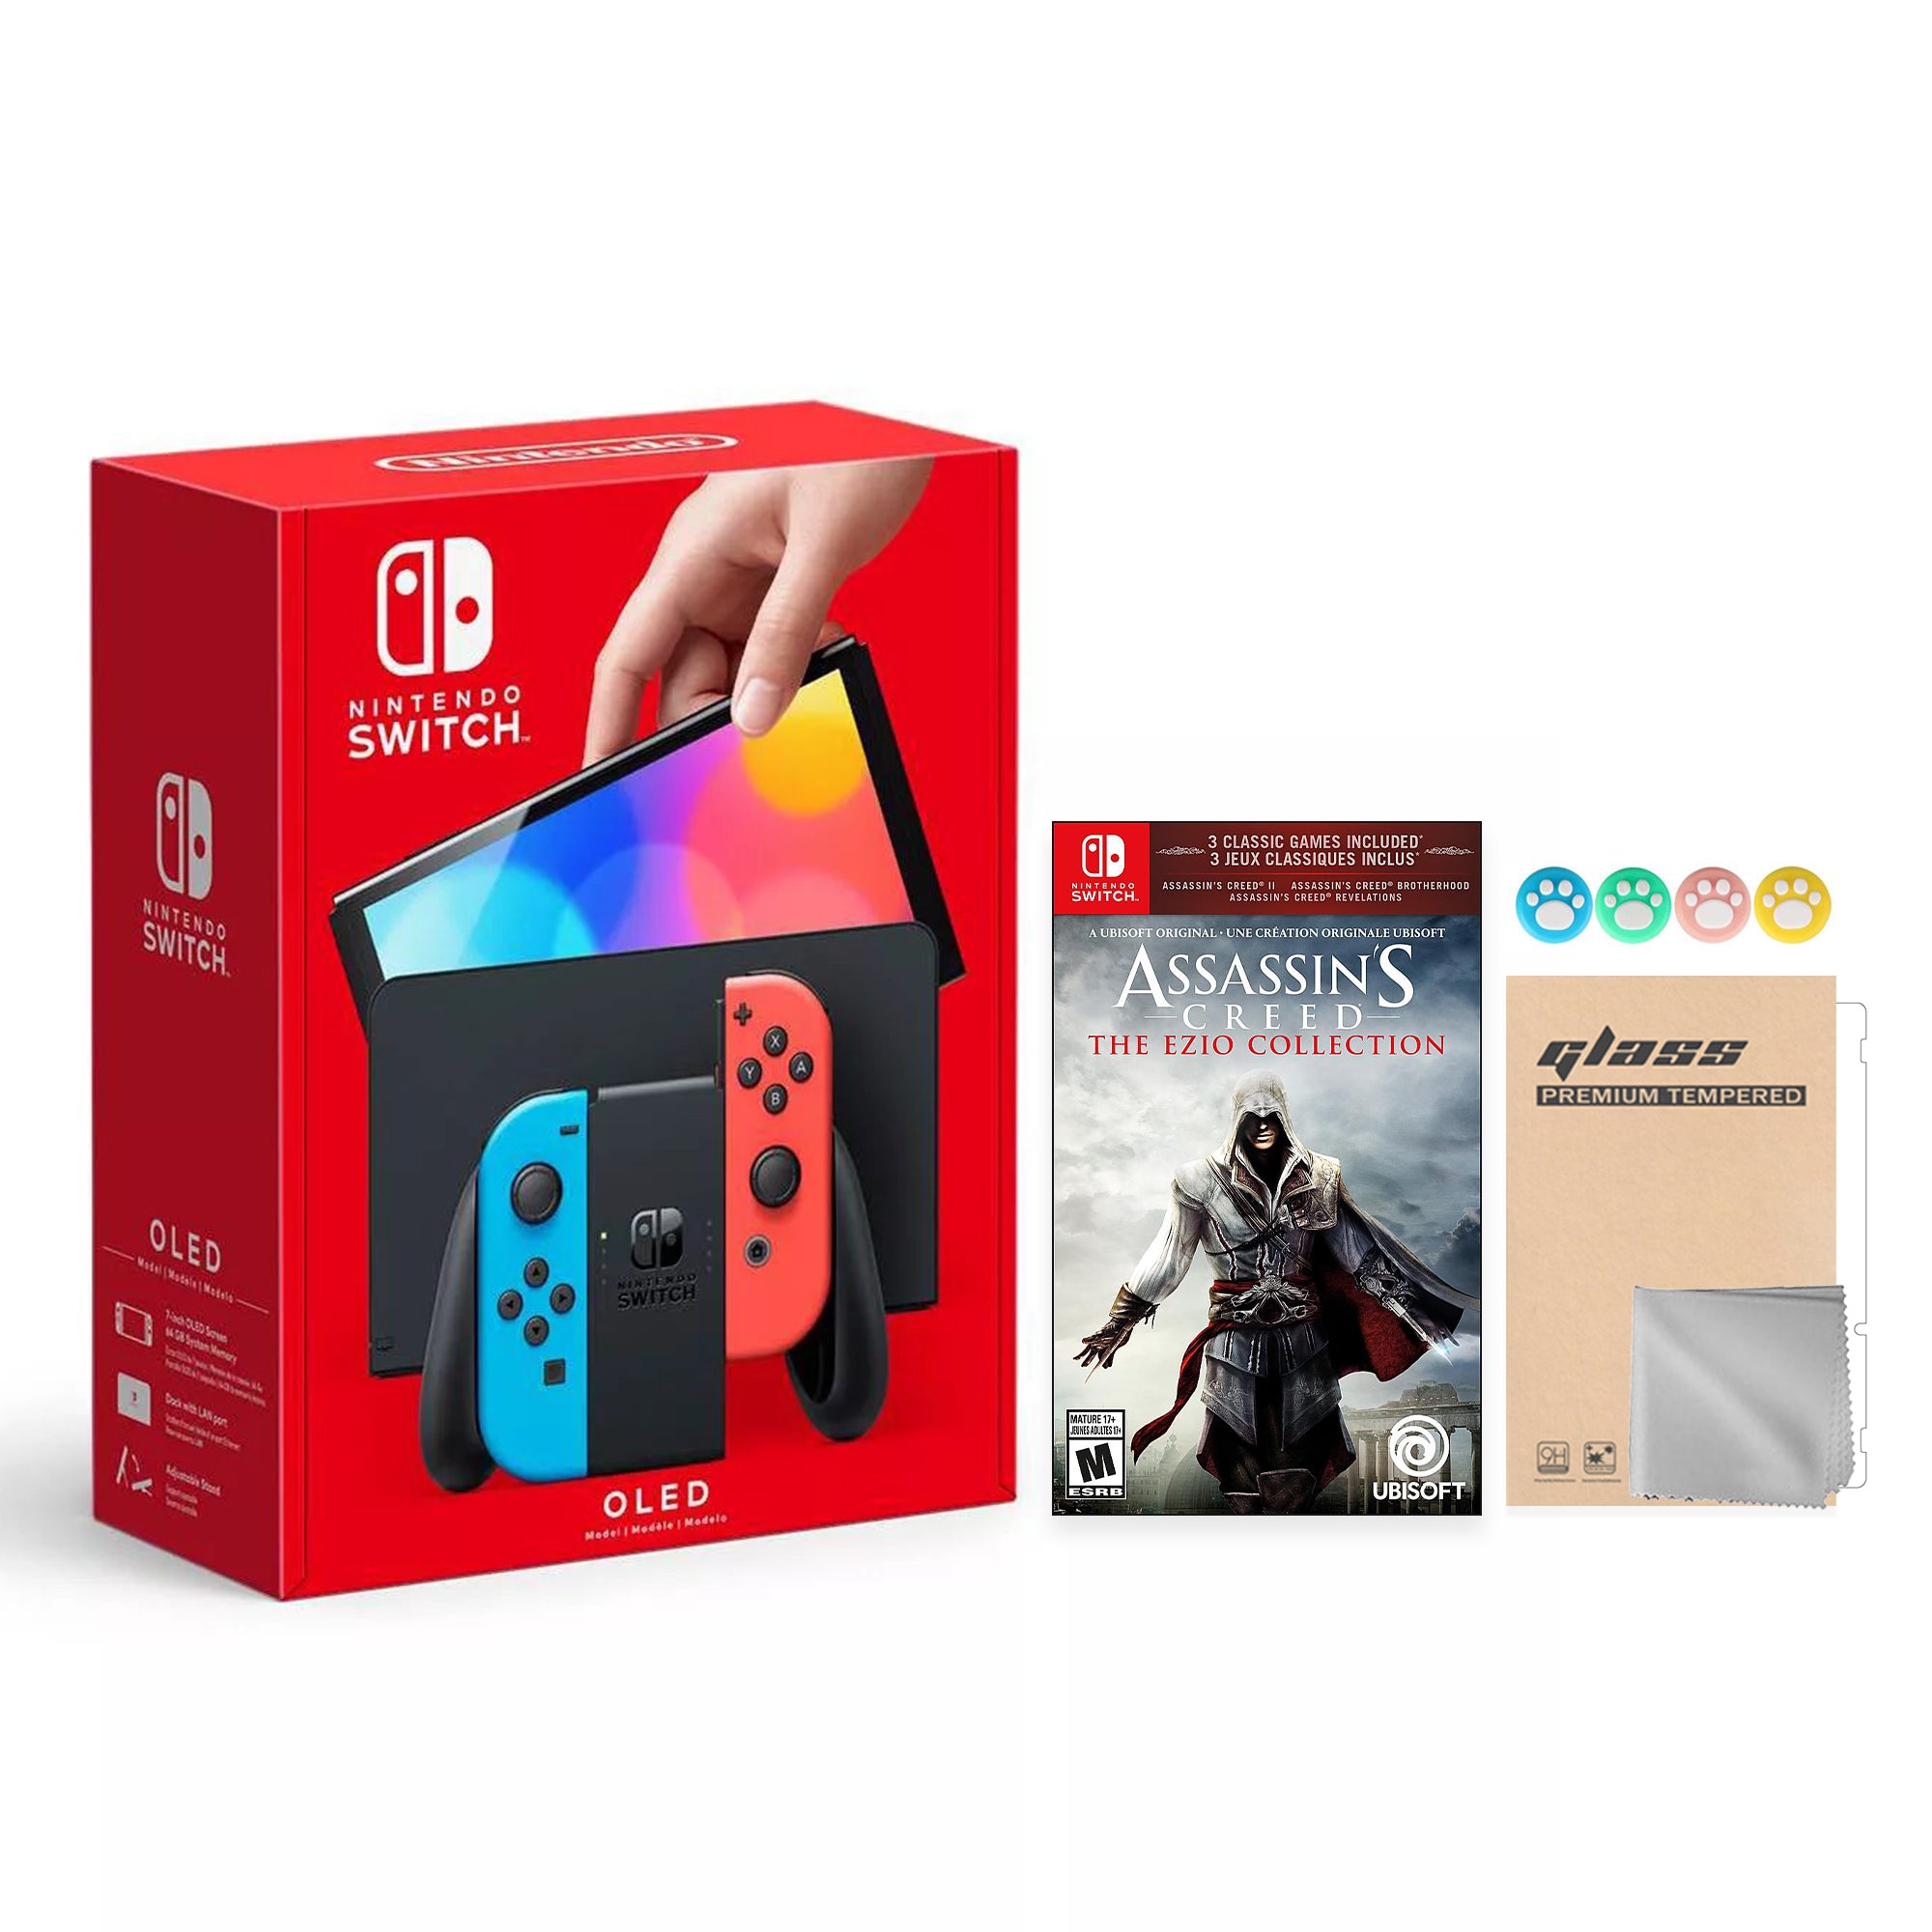 2022 New Nintendo Switch OLED Model Neon Red Blue Joy Con 64GB Console Improved HD Screen & LAN-Port Dock with Assassin's Creed Ezio Collection, Mytrix Joystick Caps & Screen Protector